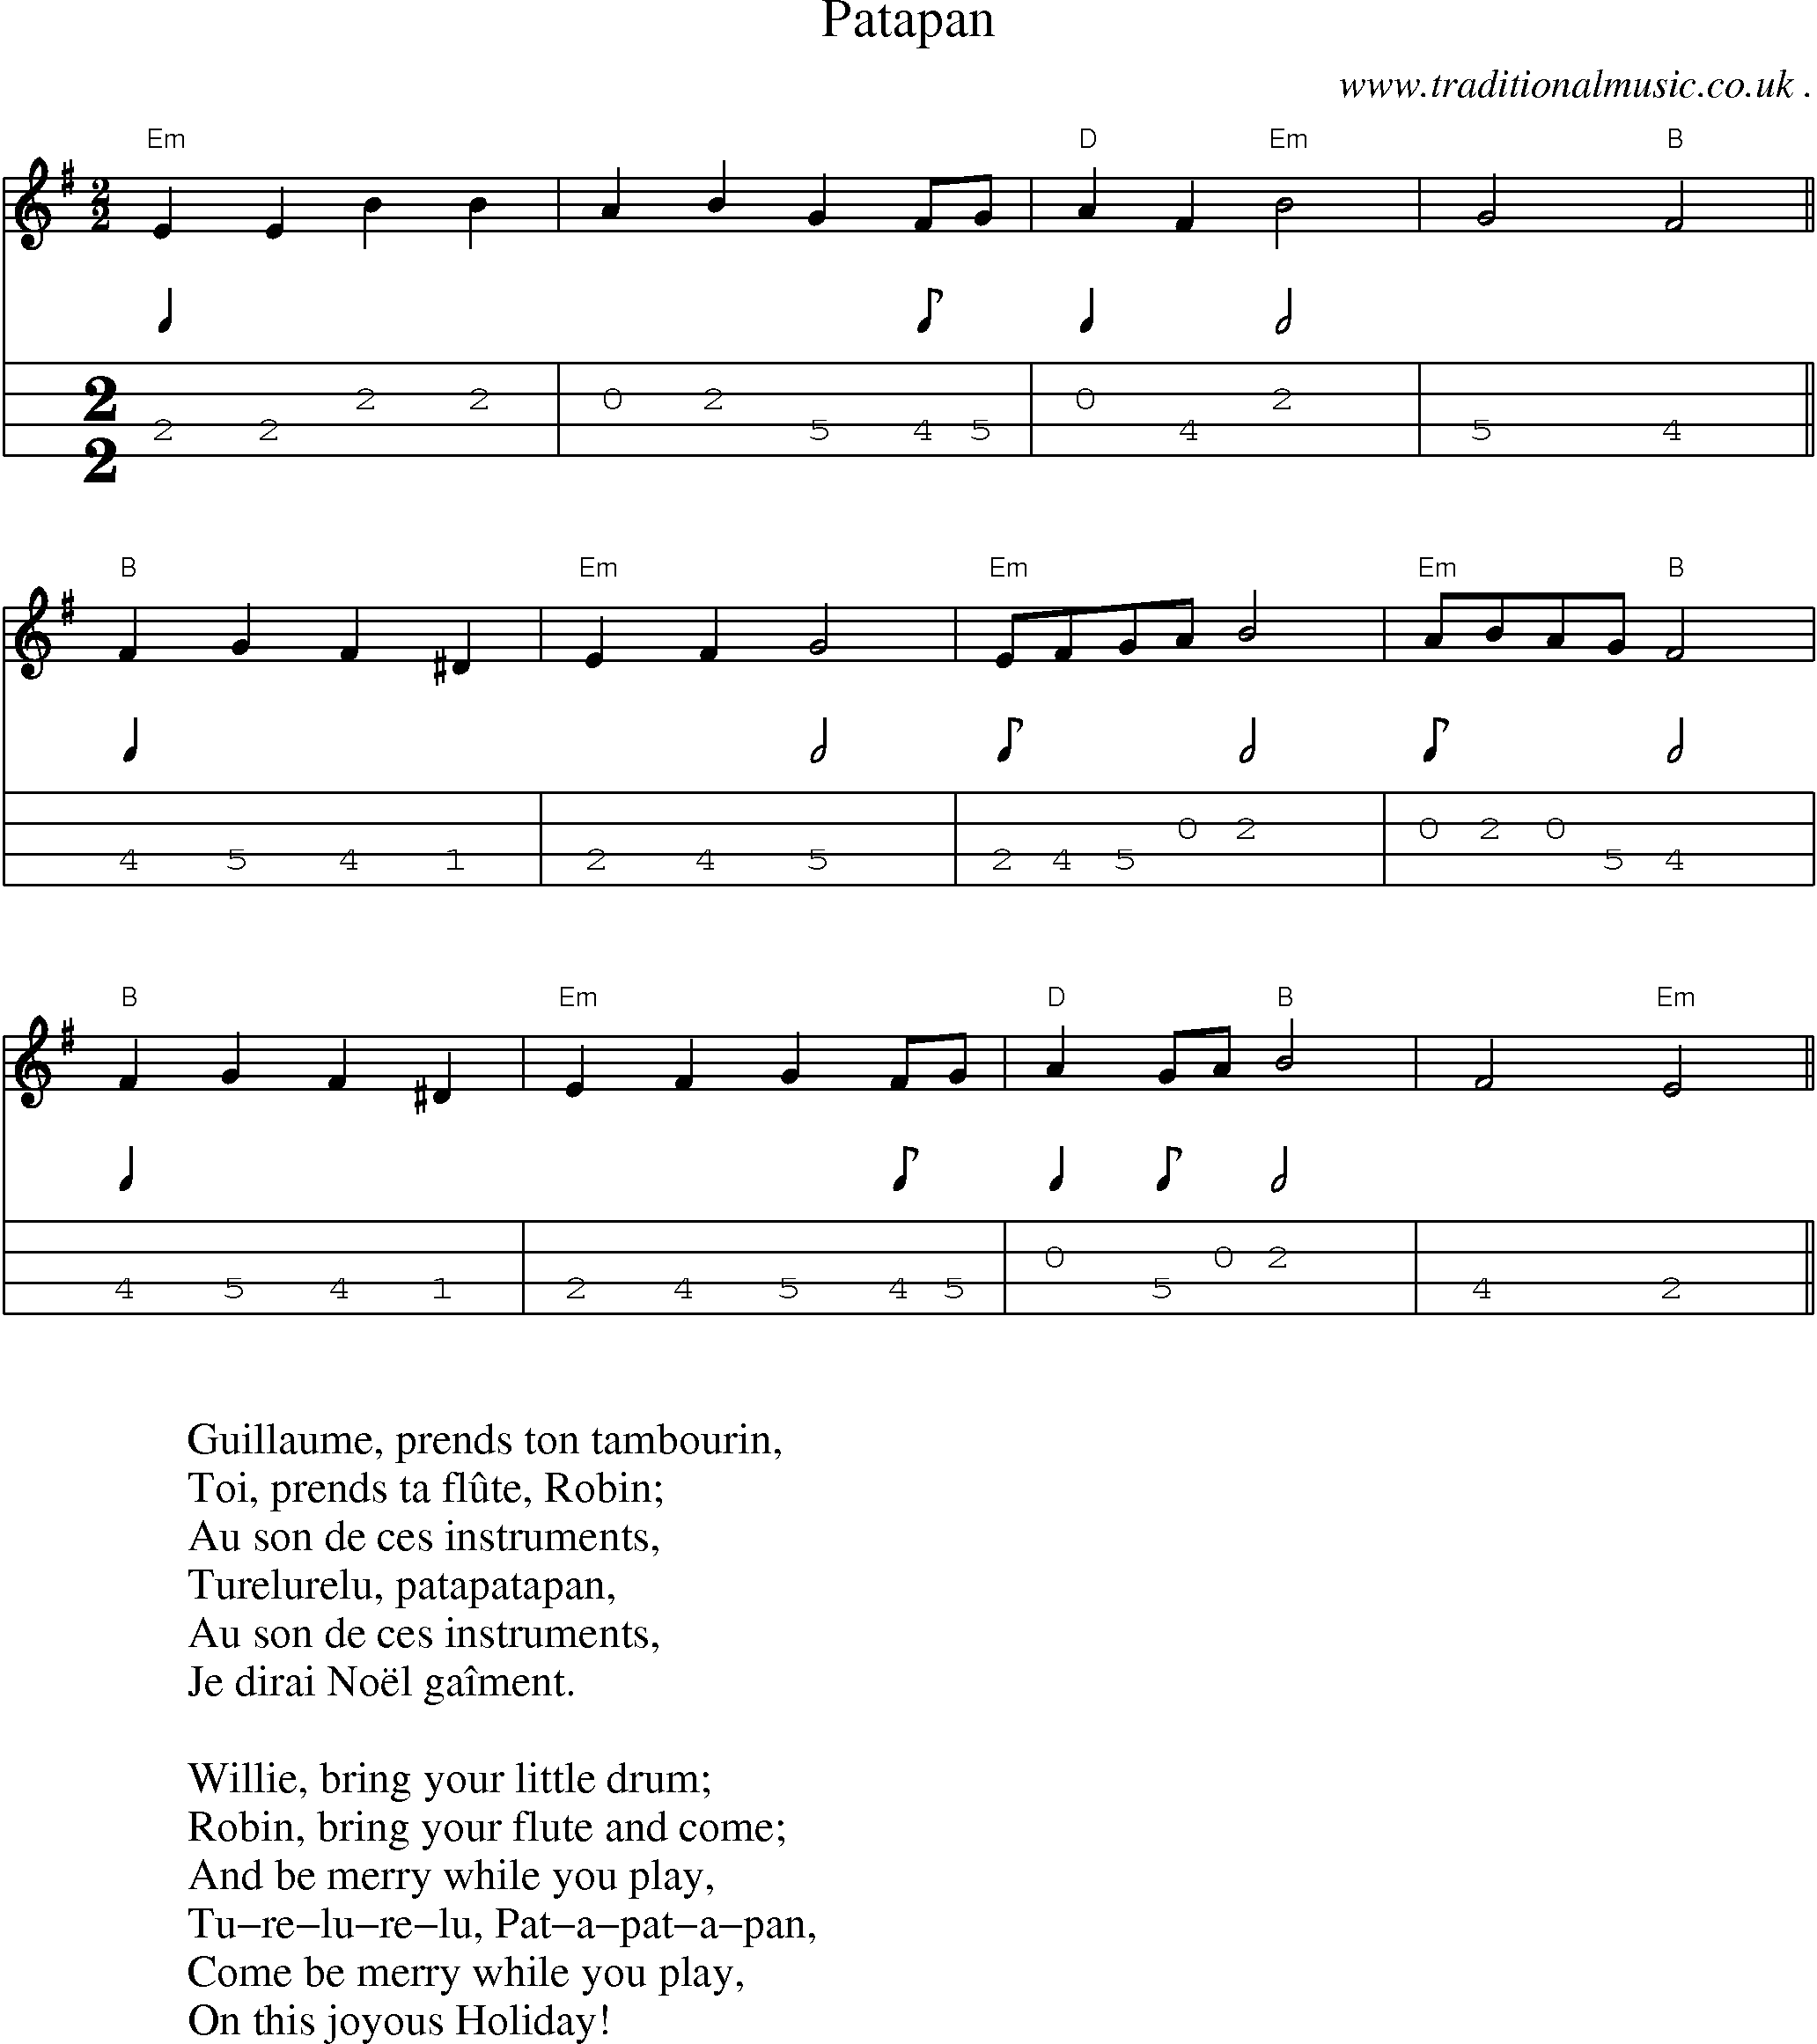 Music Score and Guitar Tabs for Patapan